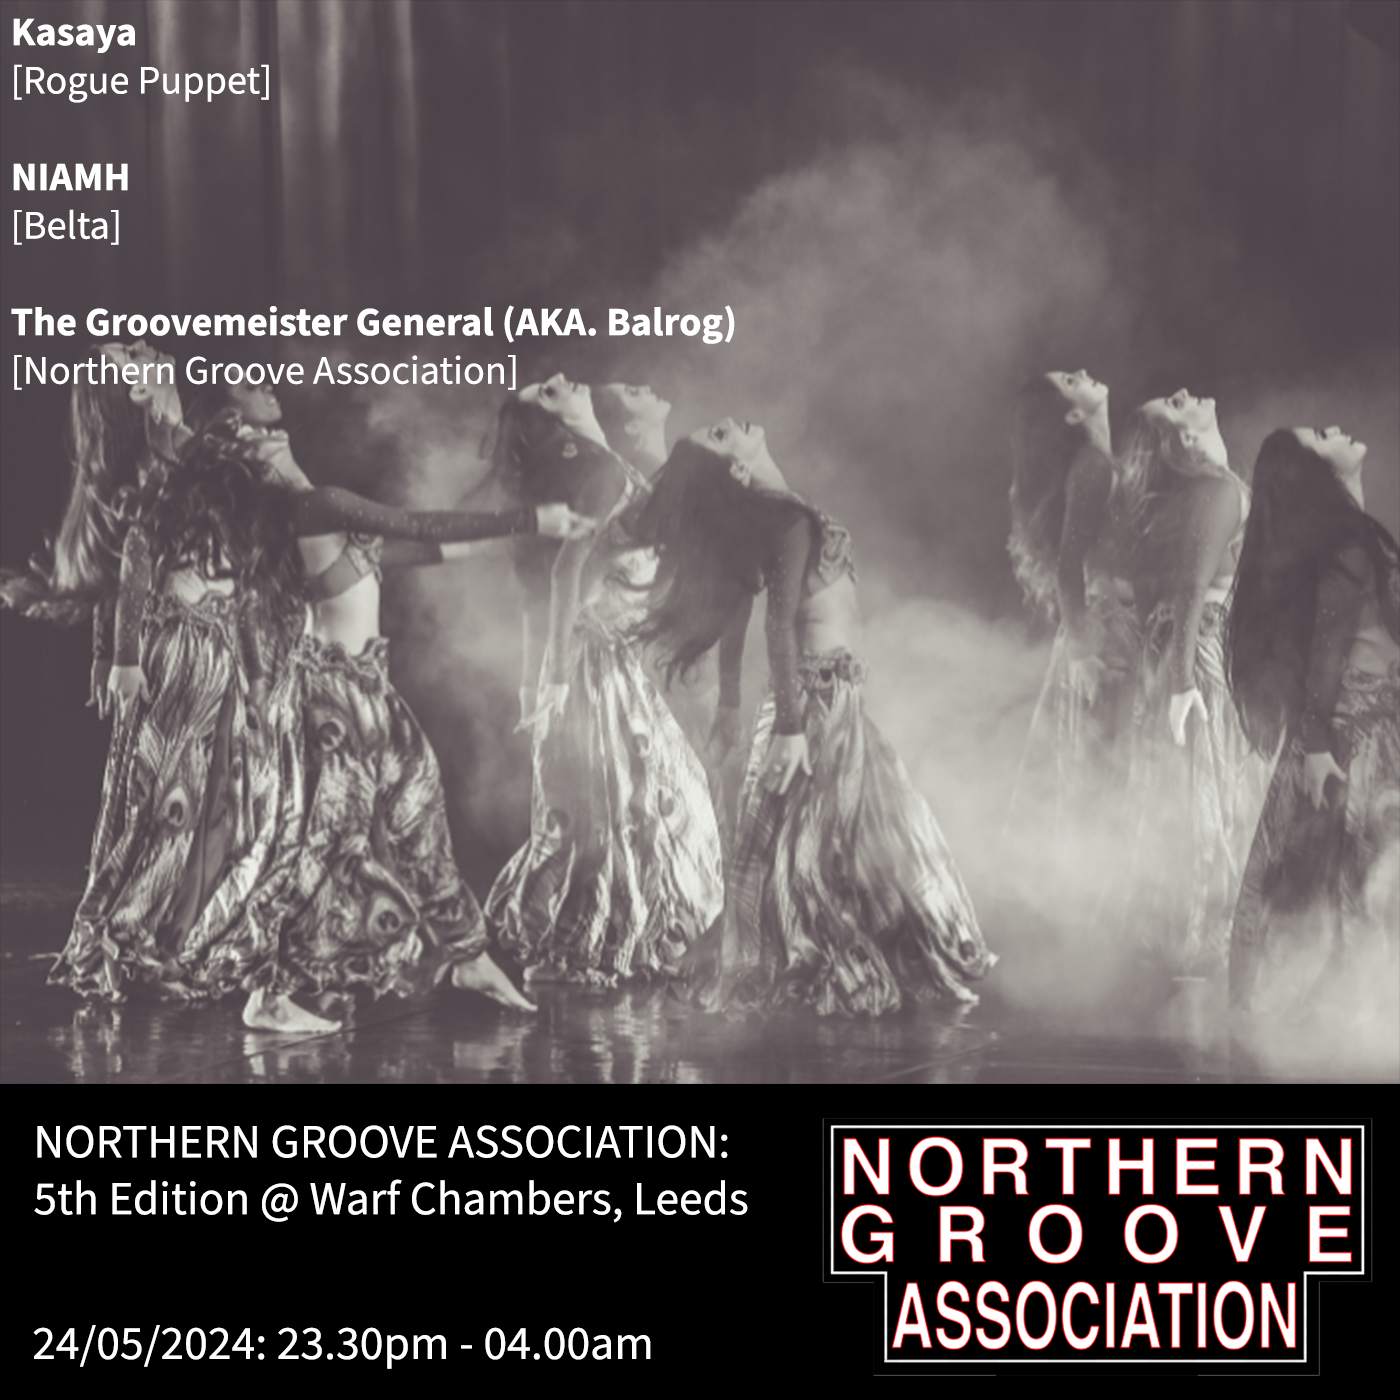 Northern Groove Association: 5th Edition - フライヤー表